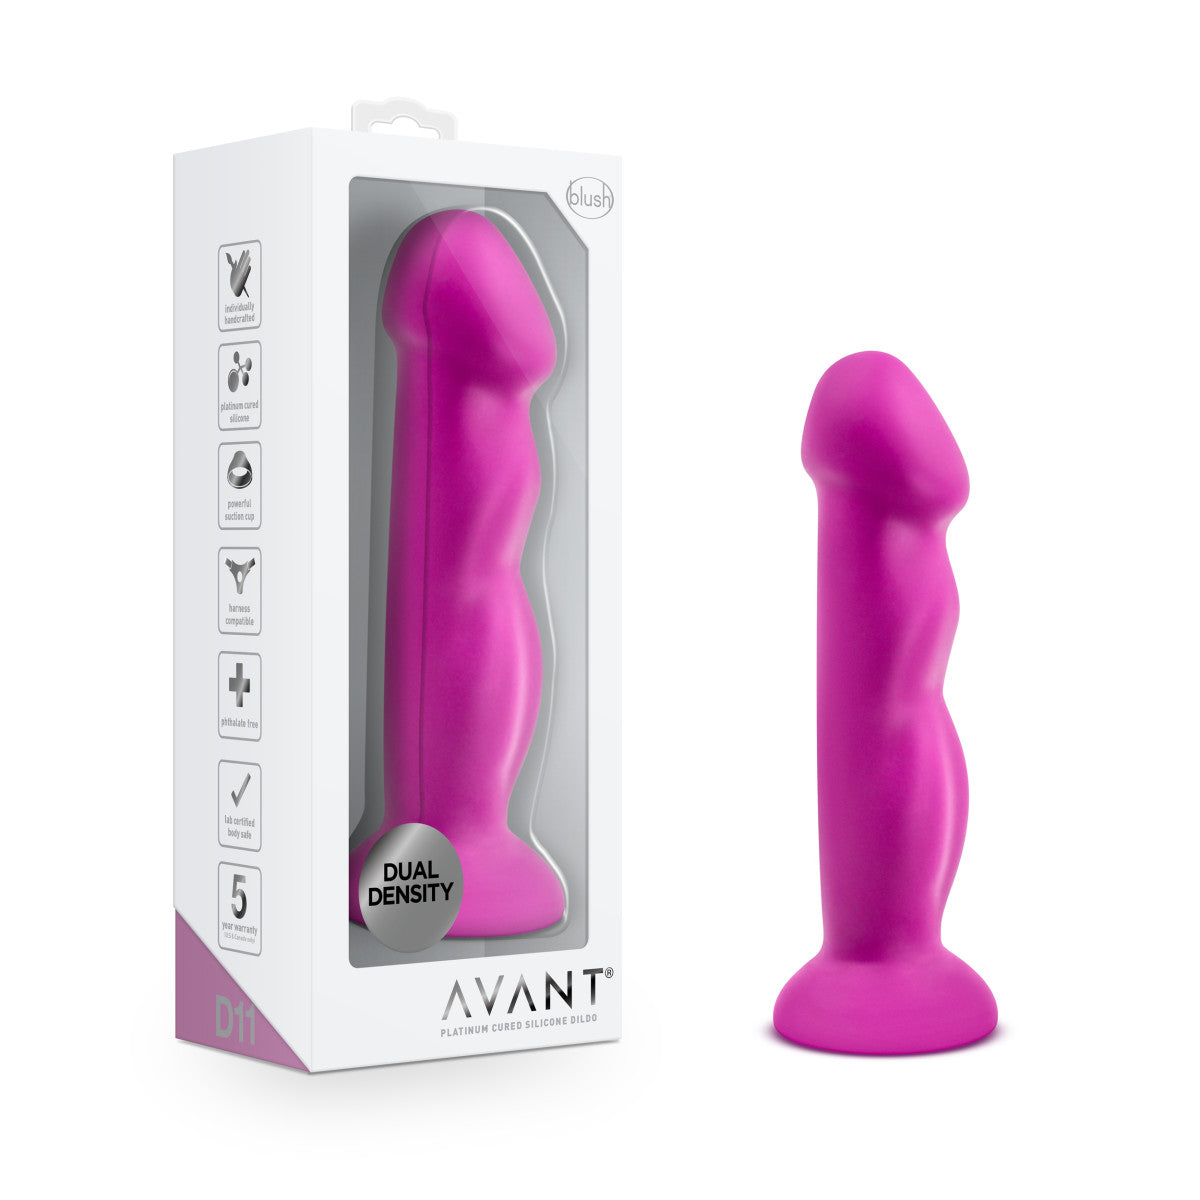 Avant | Suko Violet D11: Artisan 8 Inch Curved P-Spot / G-Spot Dildo with Suction Cup Base - Elegantly Made with Smooth Ultrasilk® Purio™ Silicone